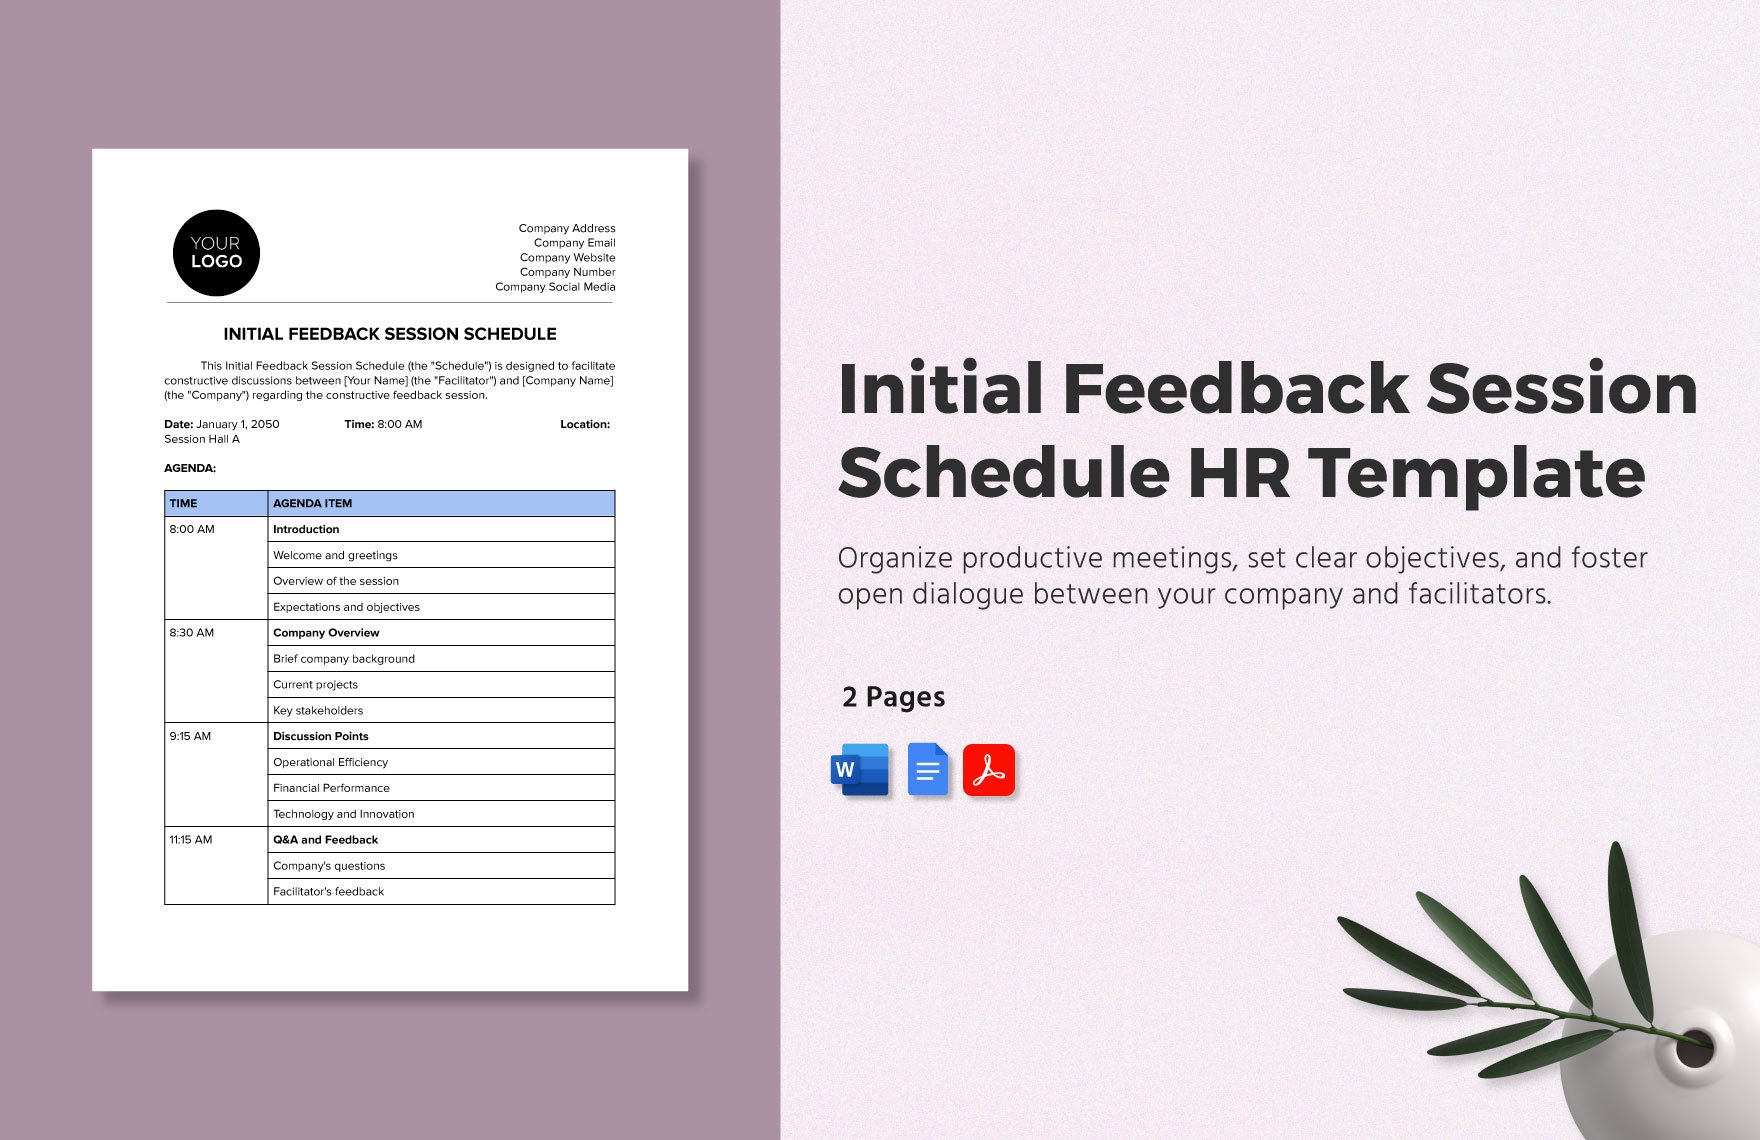 Initial Feedback Session Schedule HR Template